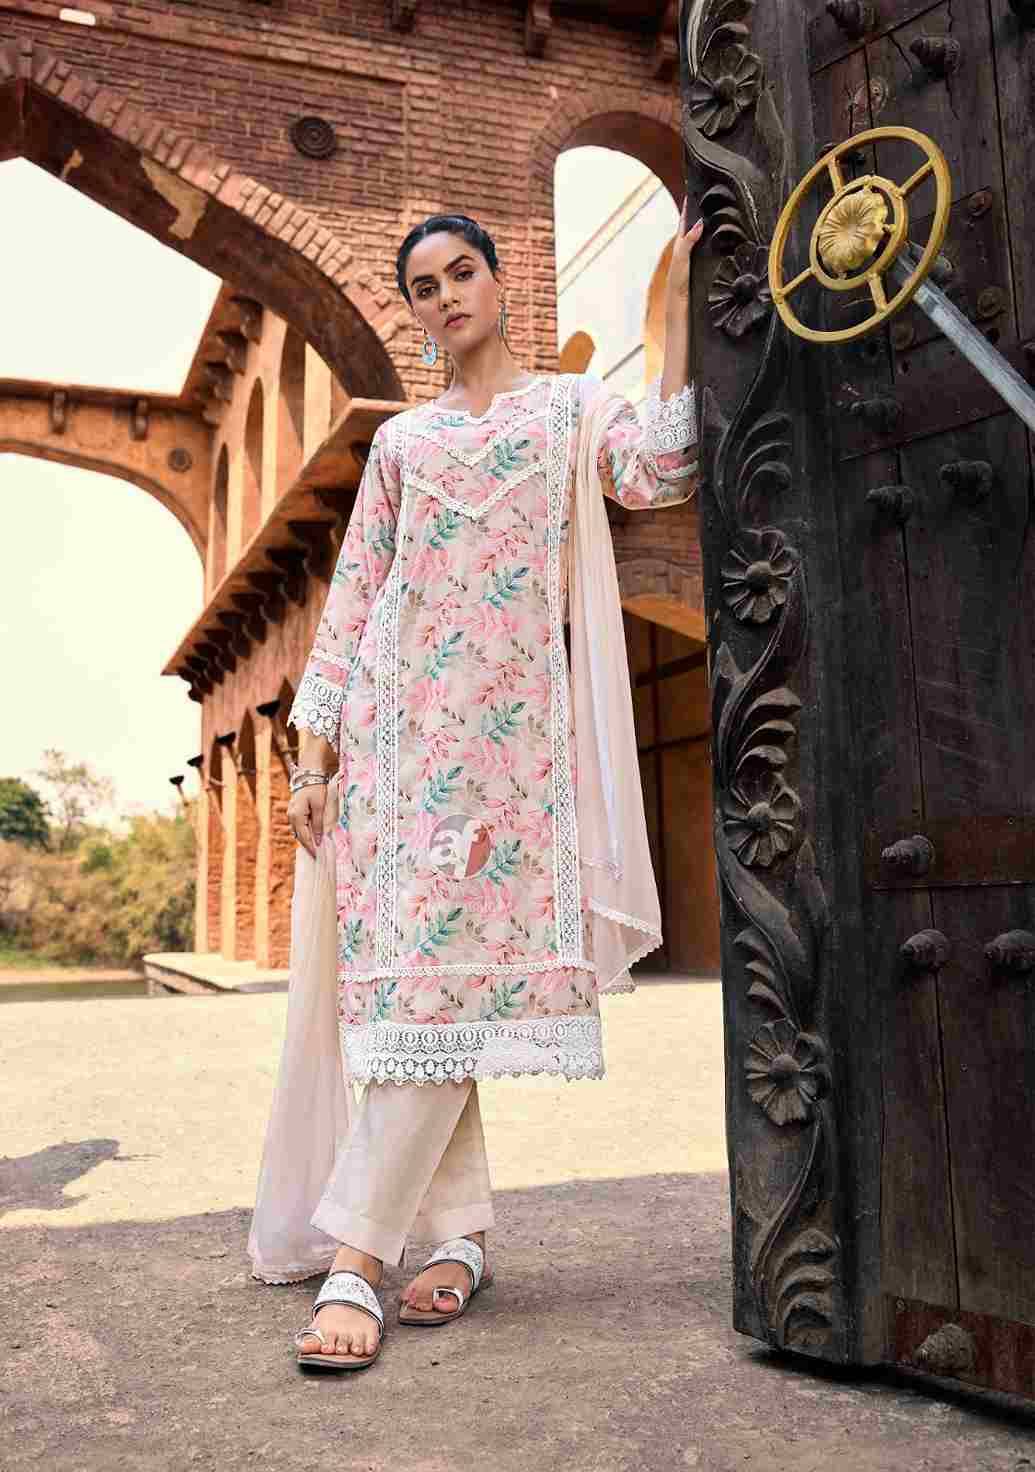 Sakhi Re Vol-2 By Anju Fabrics 3781 To 3786 Series Beautiful Festive Suits Colorful Stylish Fancy Casual Wear & Ethnic Wear Pure Linen Cotton Dresses At Wholesale Price